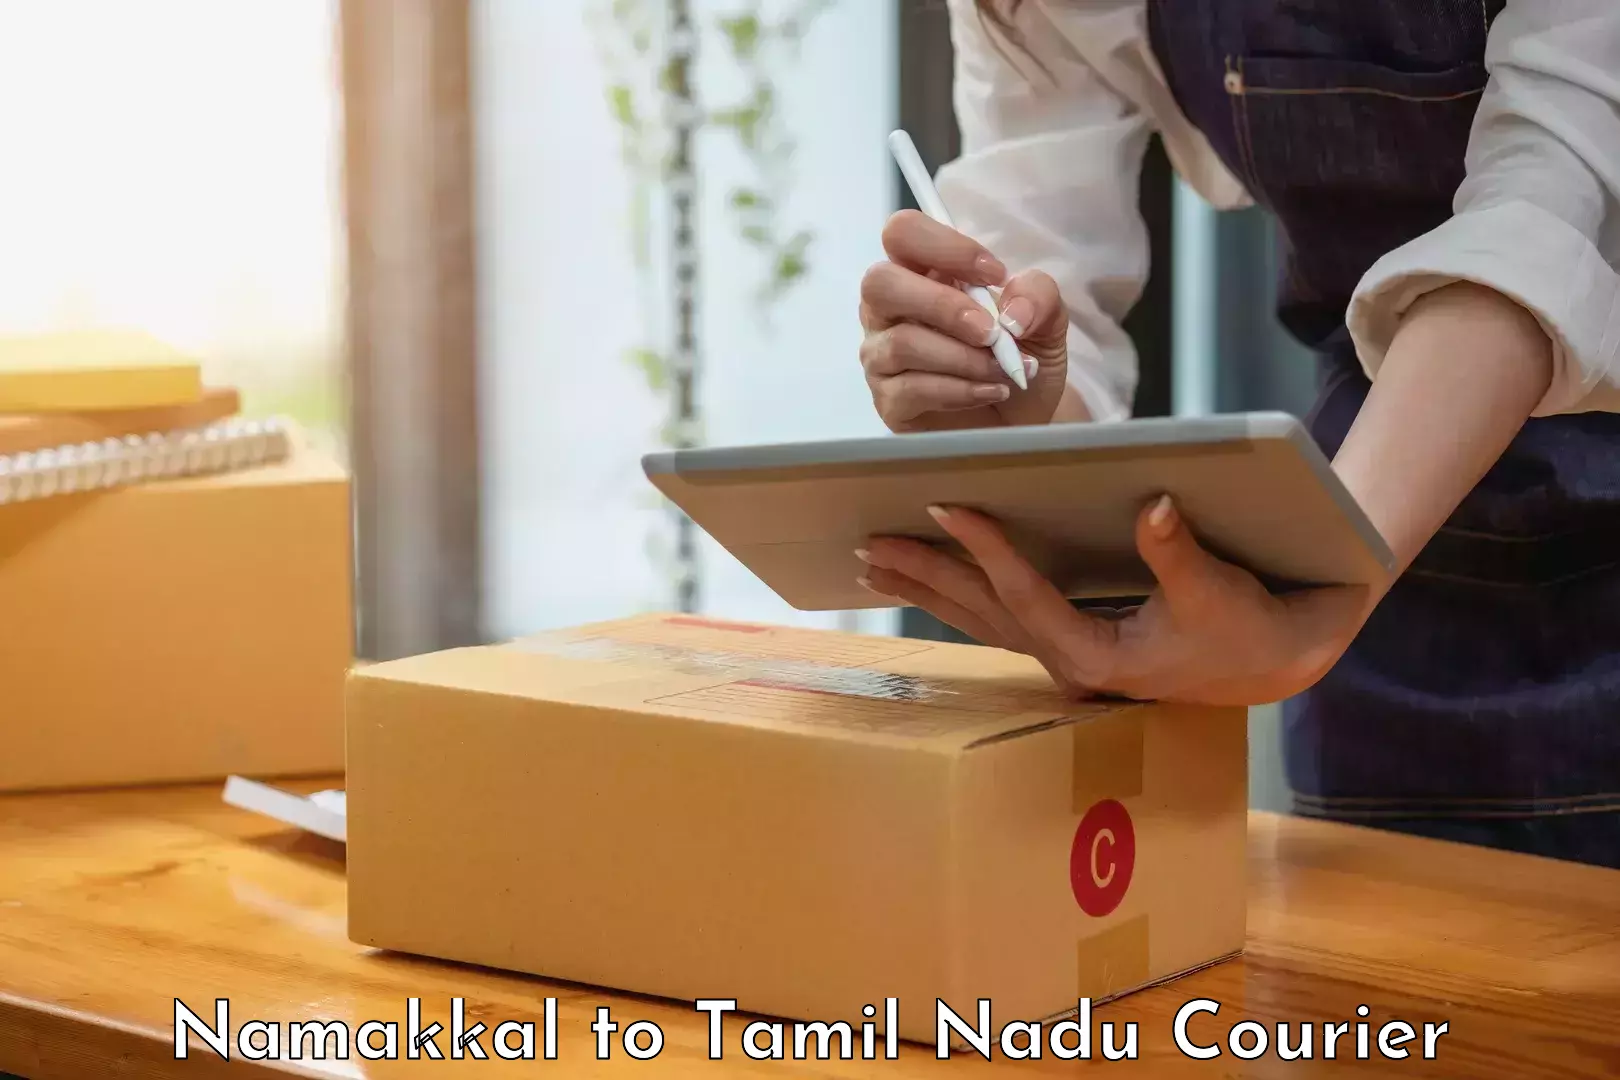 Courier service comparison in Namakkal to Gudalur